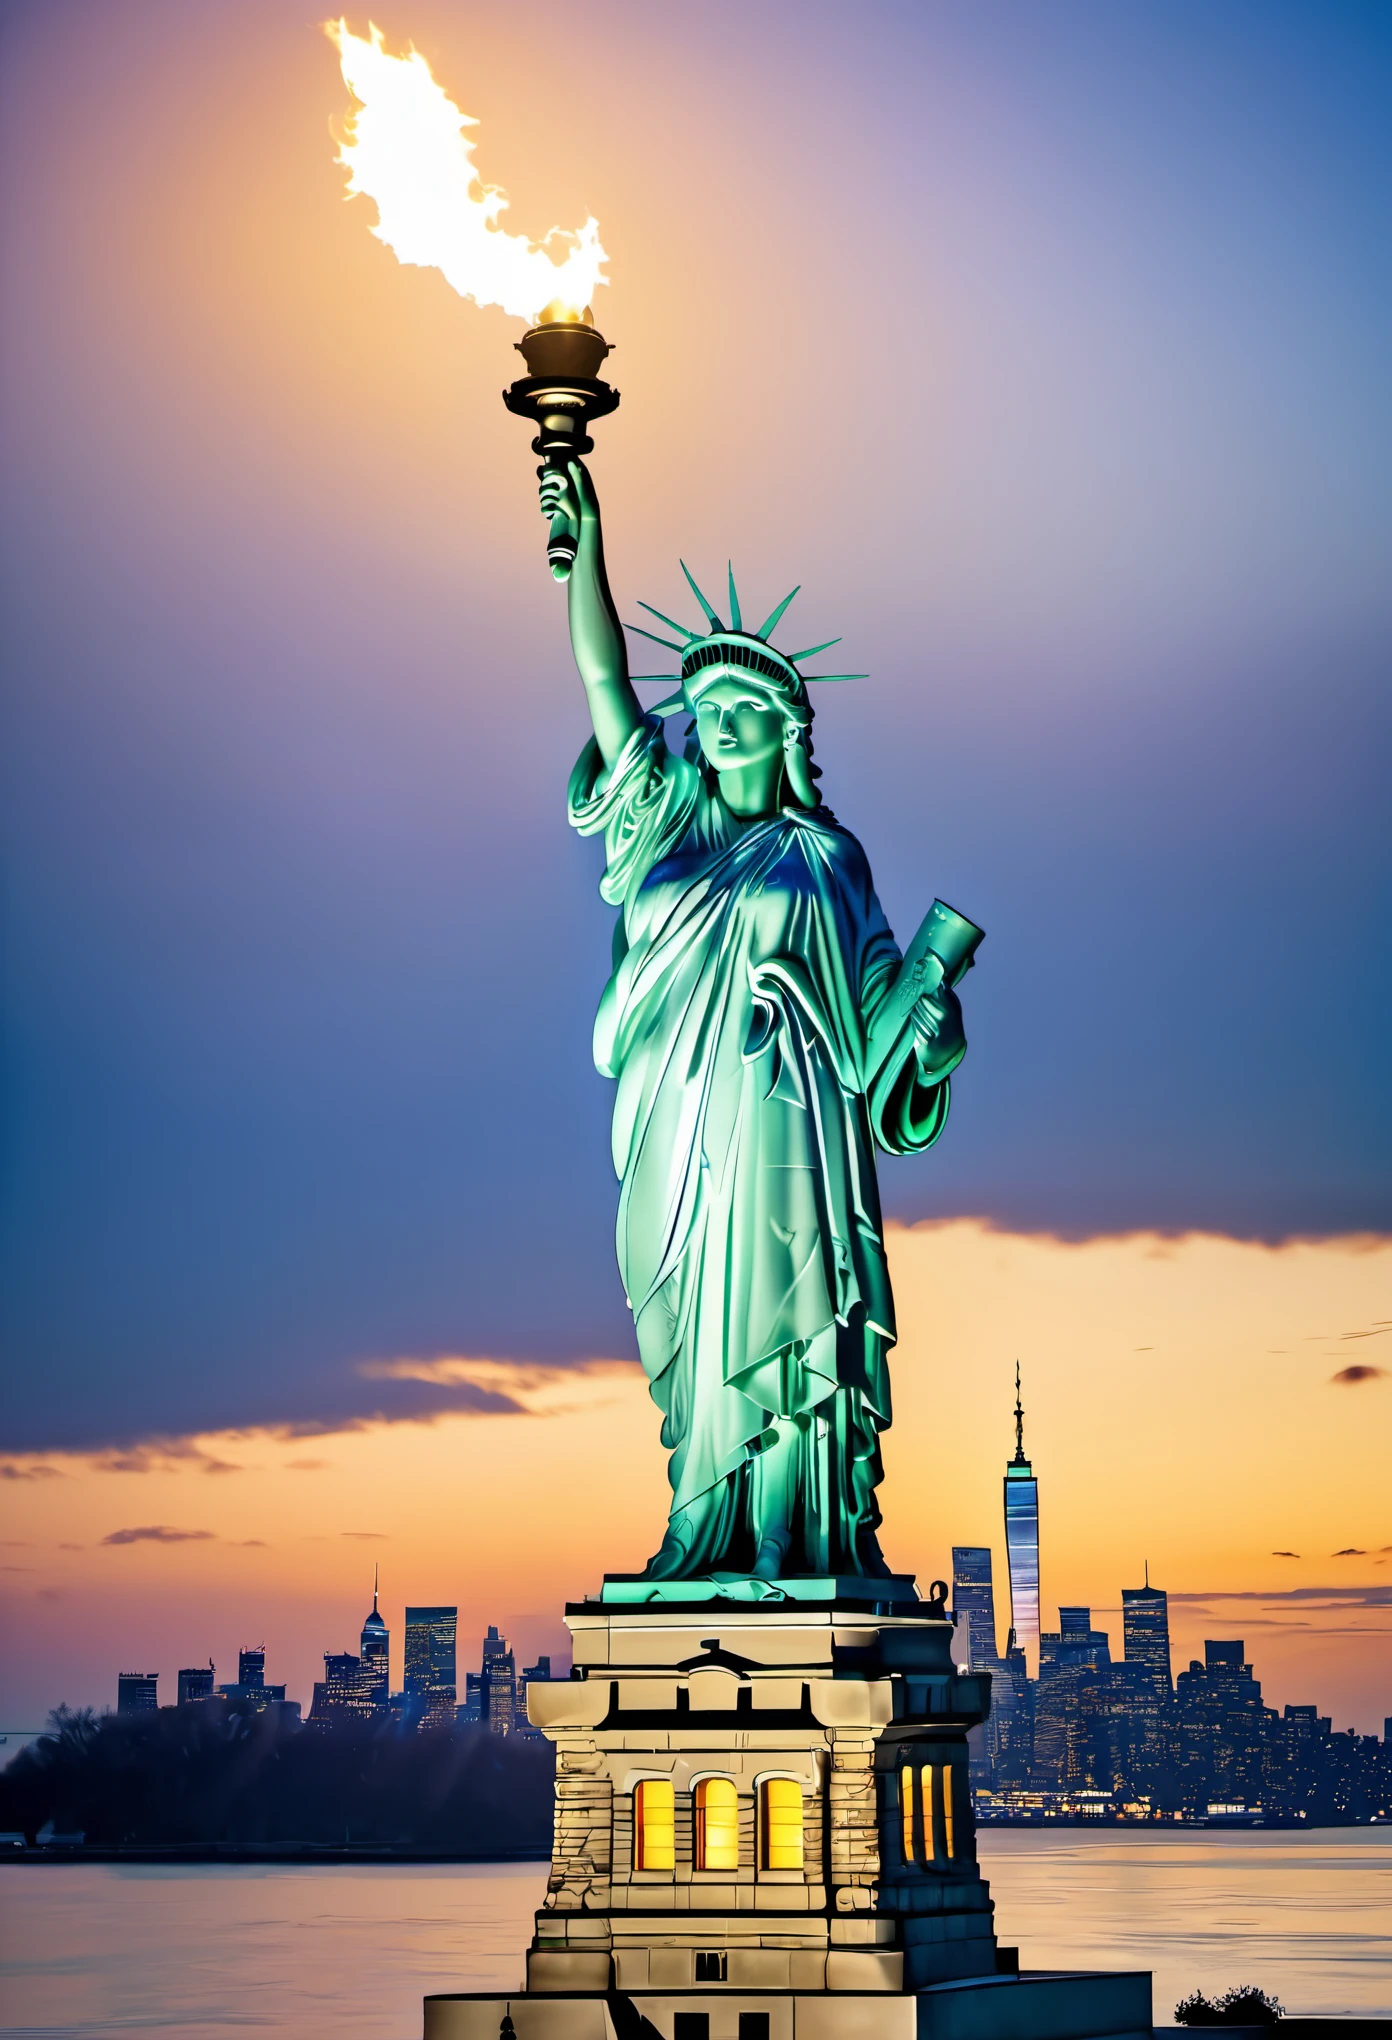 statue of Liberty holding a torch in the air, statue of Liberty, photo of the statue of Liberty, the goddess statue, goddess statue at left, represent, goddess statue sitting pose, on the island, nice images, lit in the light of dawn, new york background, beautiful scenery, stylized photo, Robert Scott Lauder